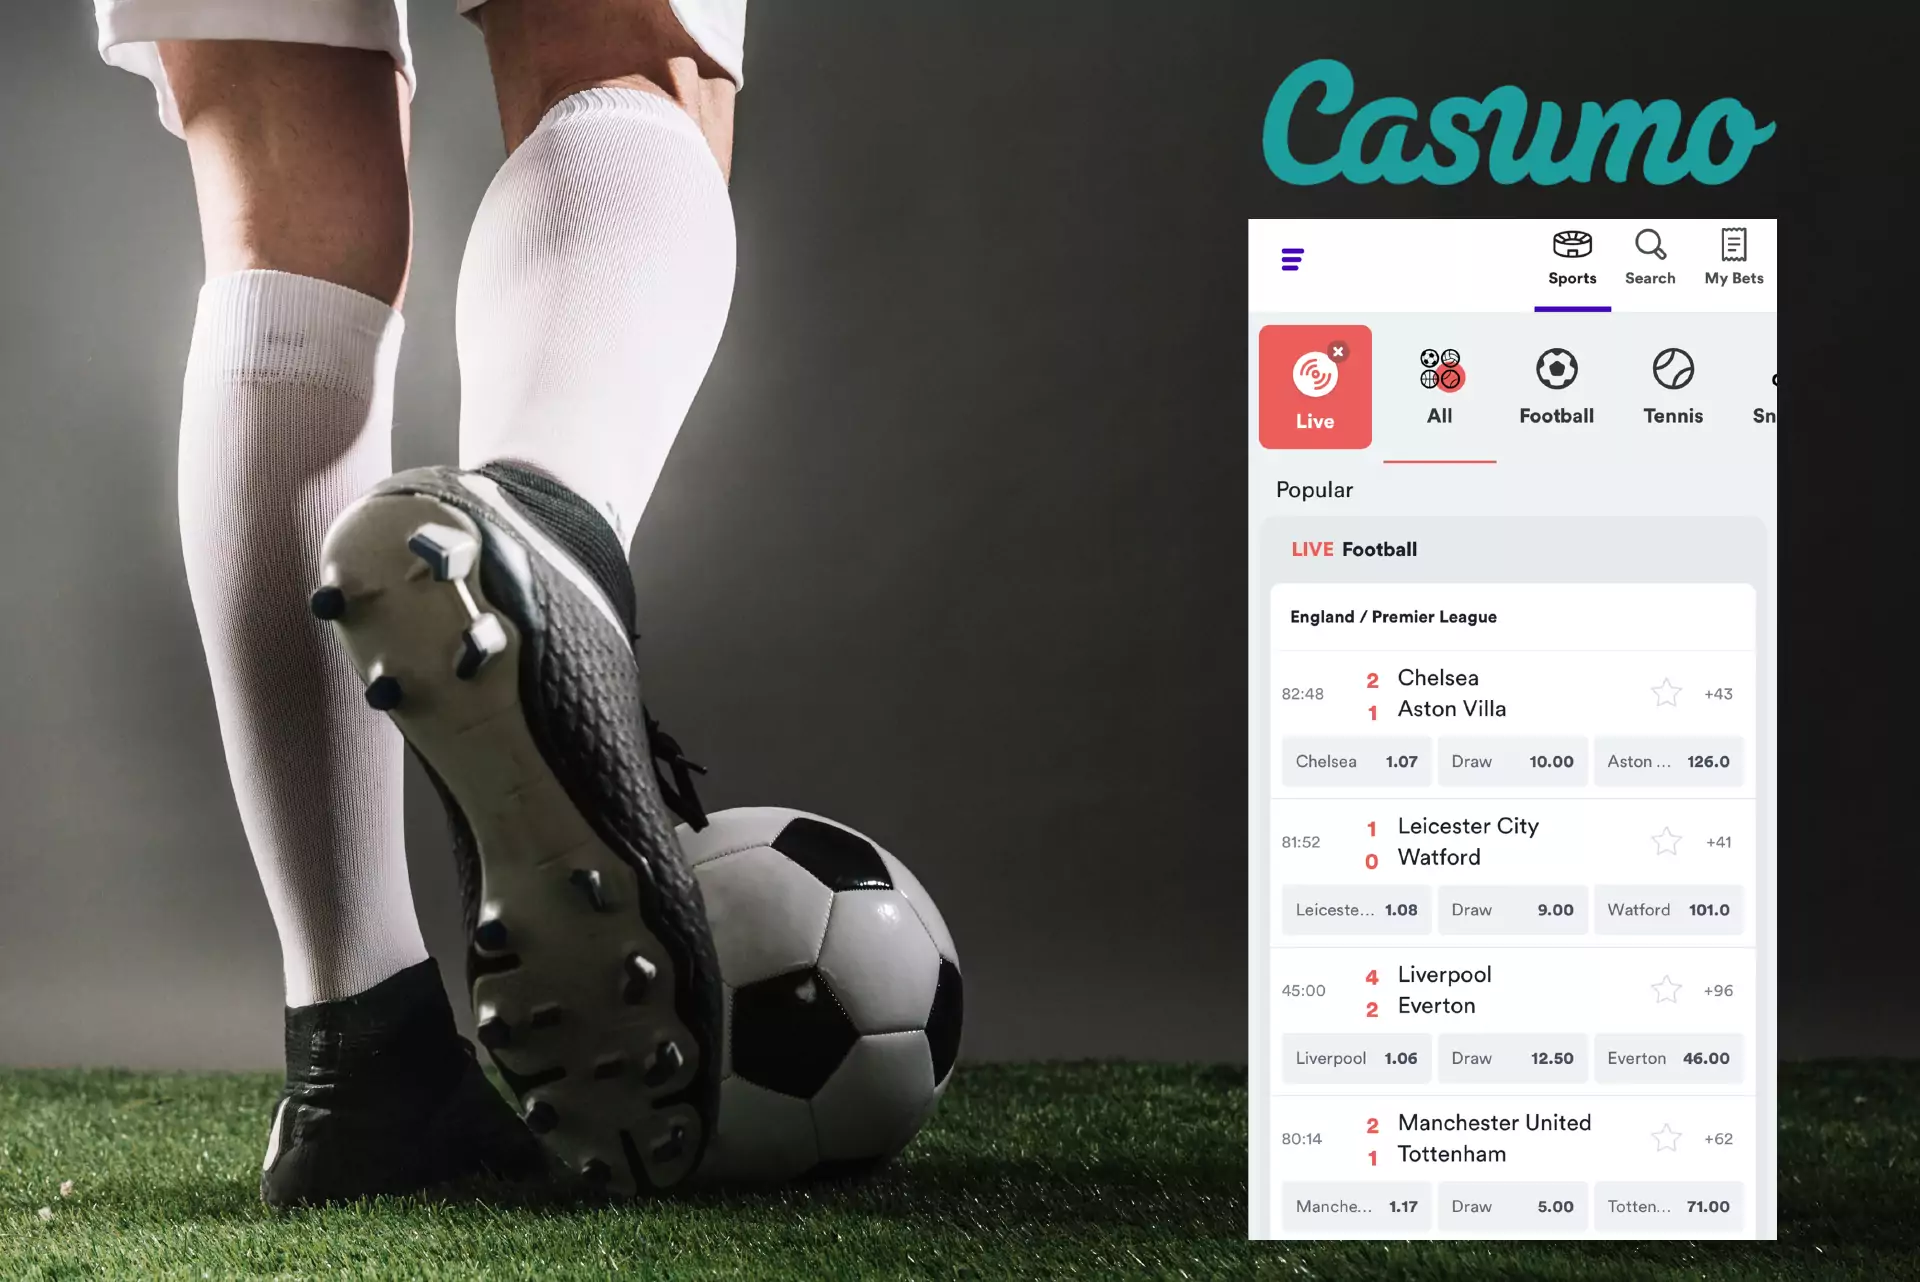 Users can bet sports on Casumo.